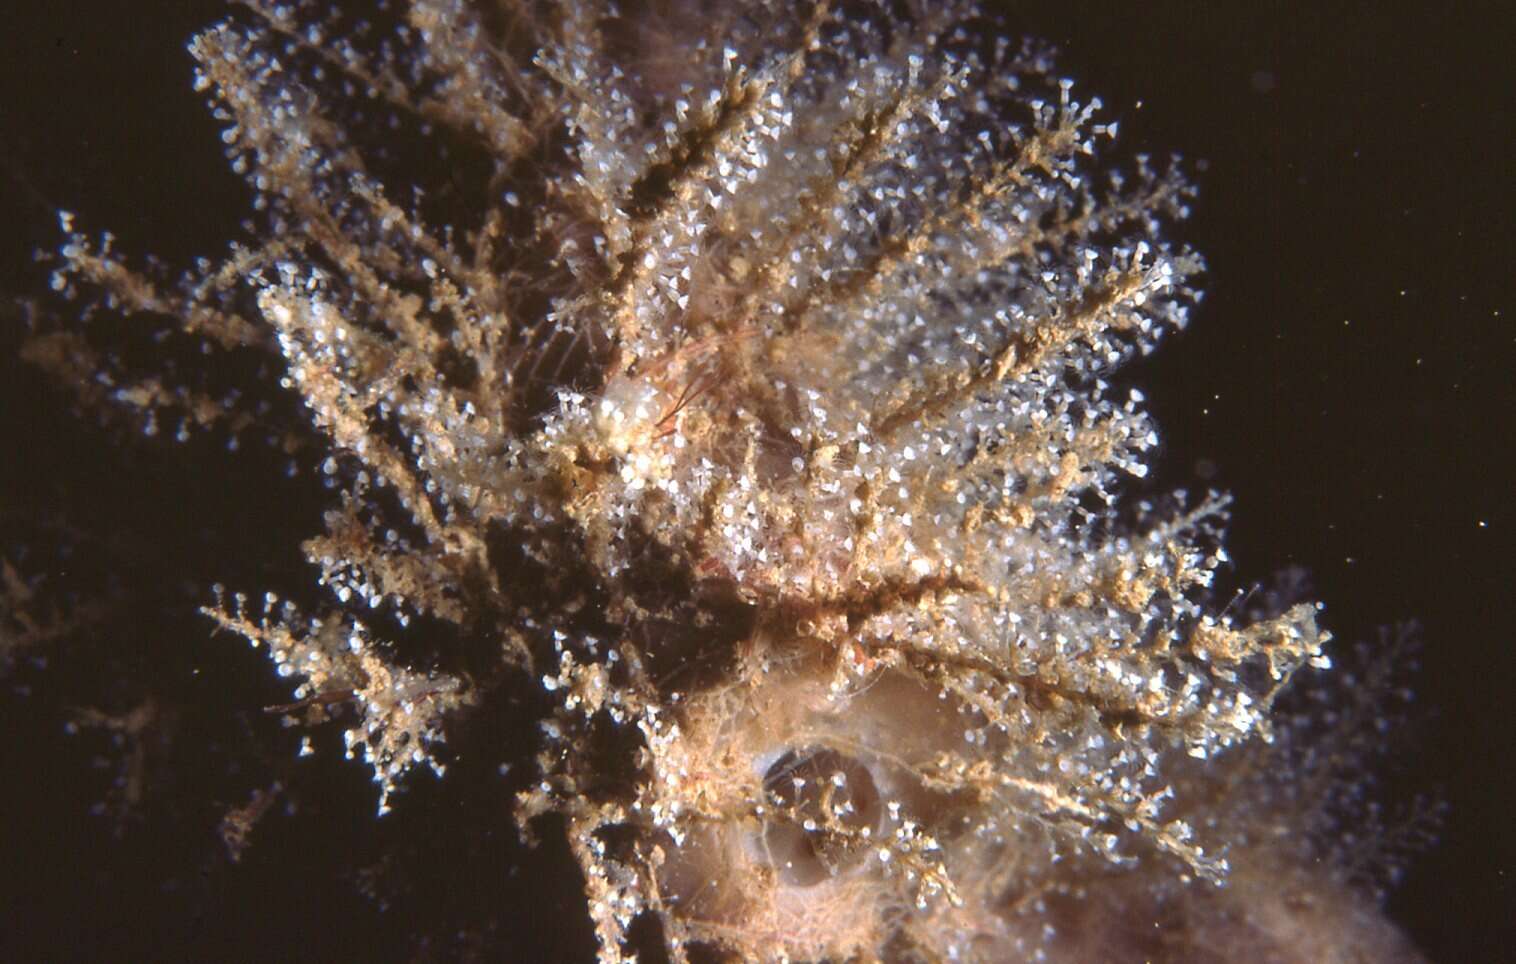 Image of Hydrodendron australe (Bale 1919)